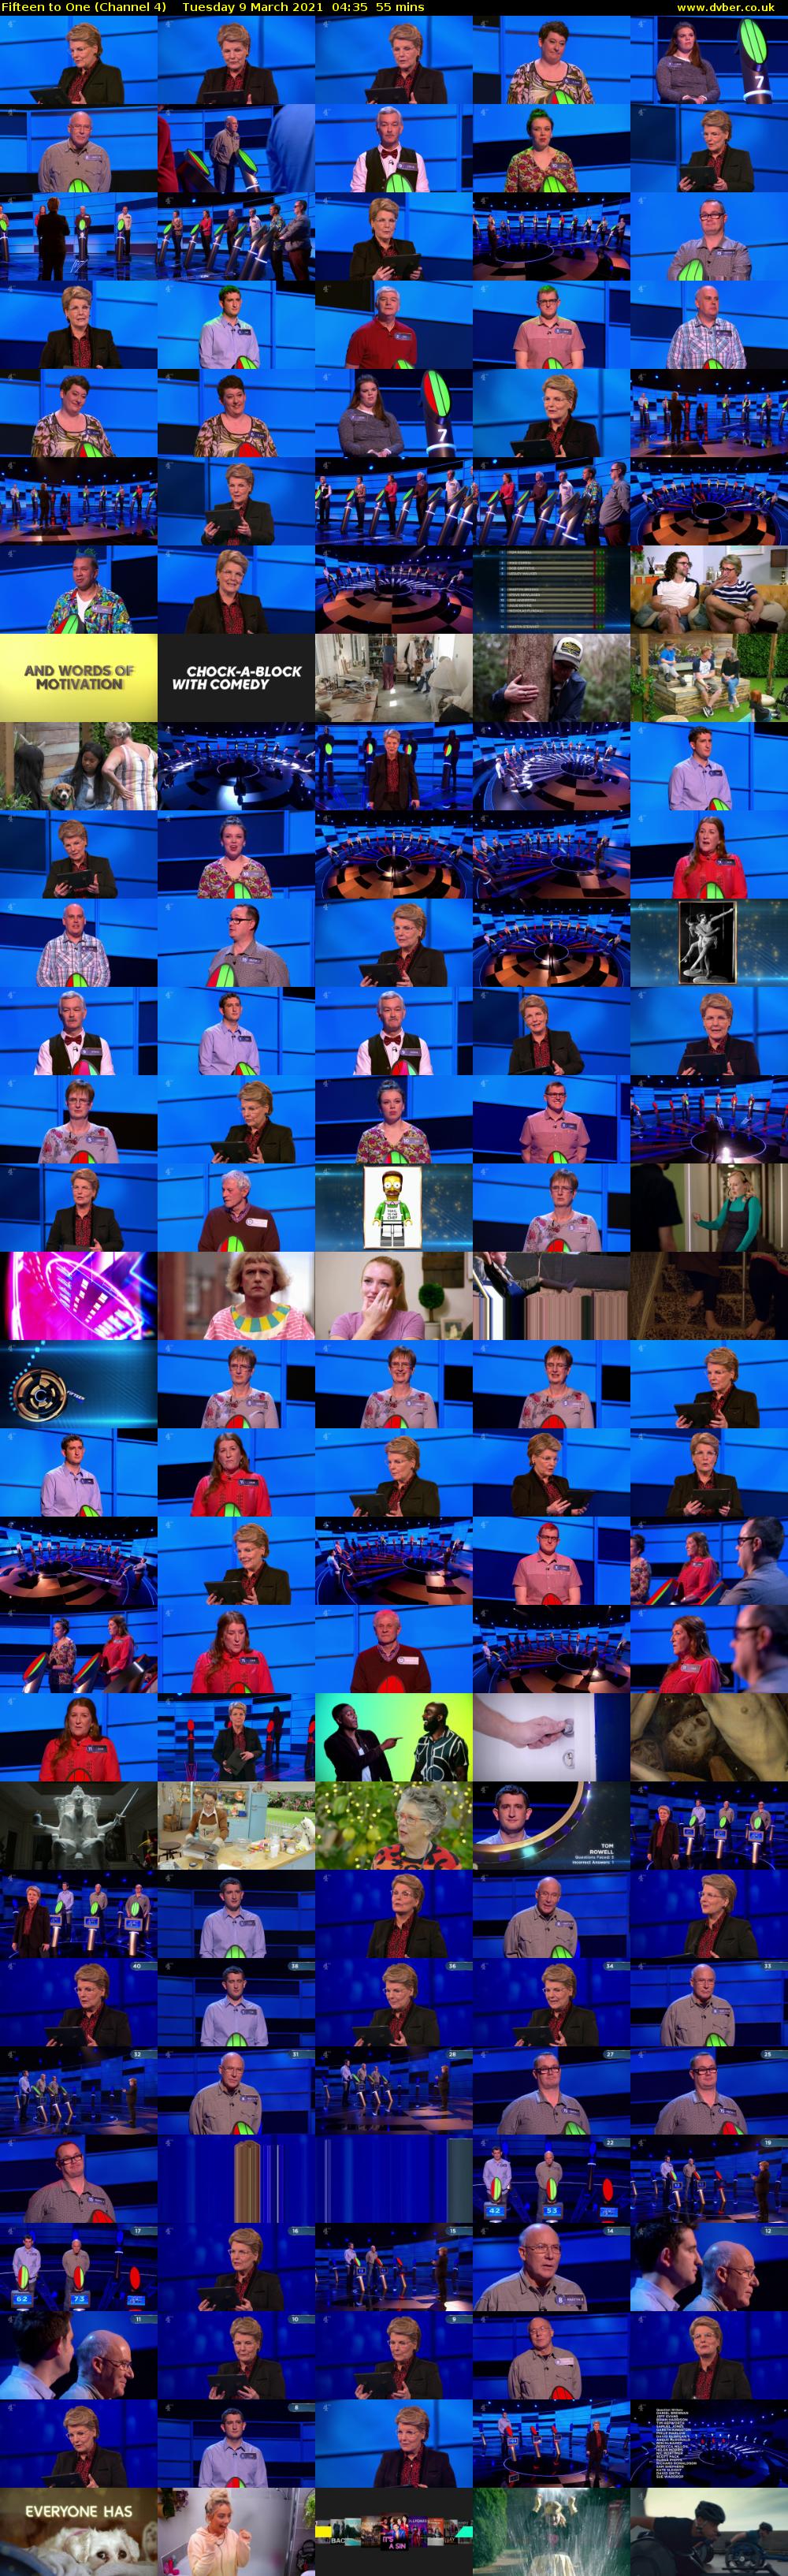 Fifteen to One (Channel 4) Tuesday 9 March 2021 04:35 - 05:30